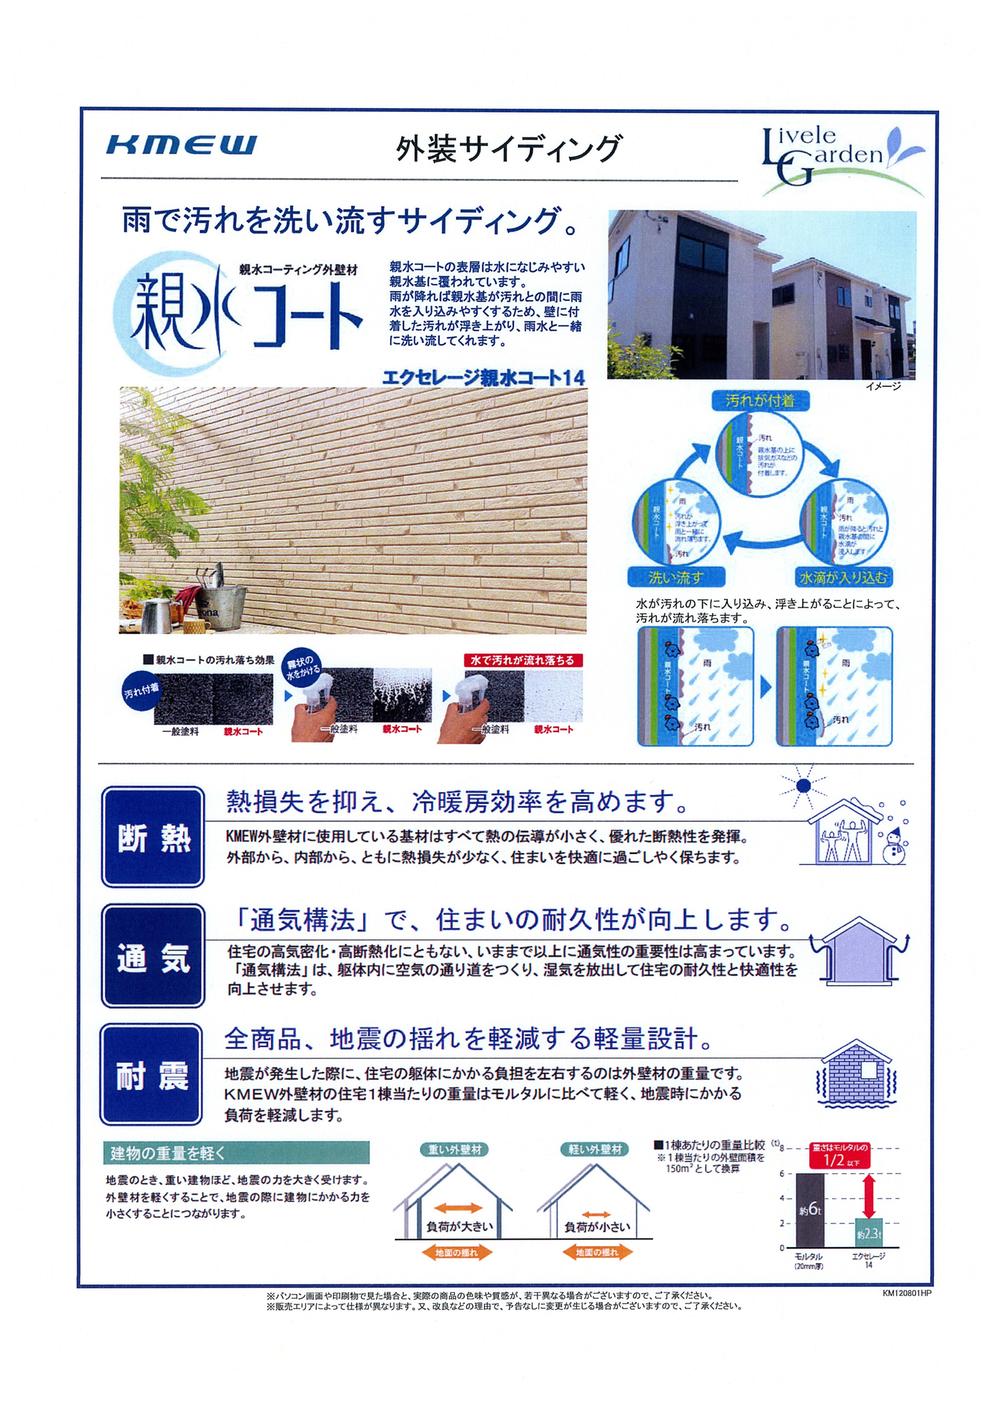 Construction ・ Construction method ・ specification. Hydrophilic coating exterior wall material to wash away the dirt in the rain